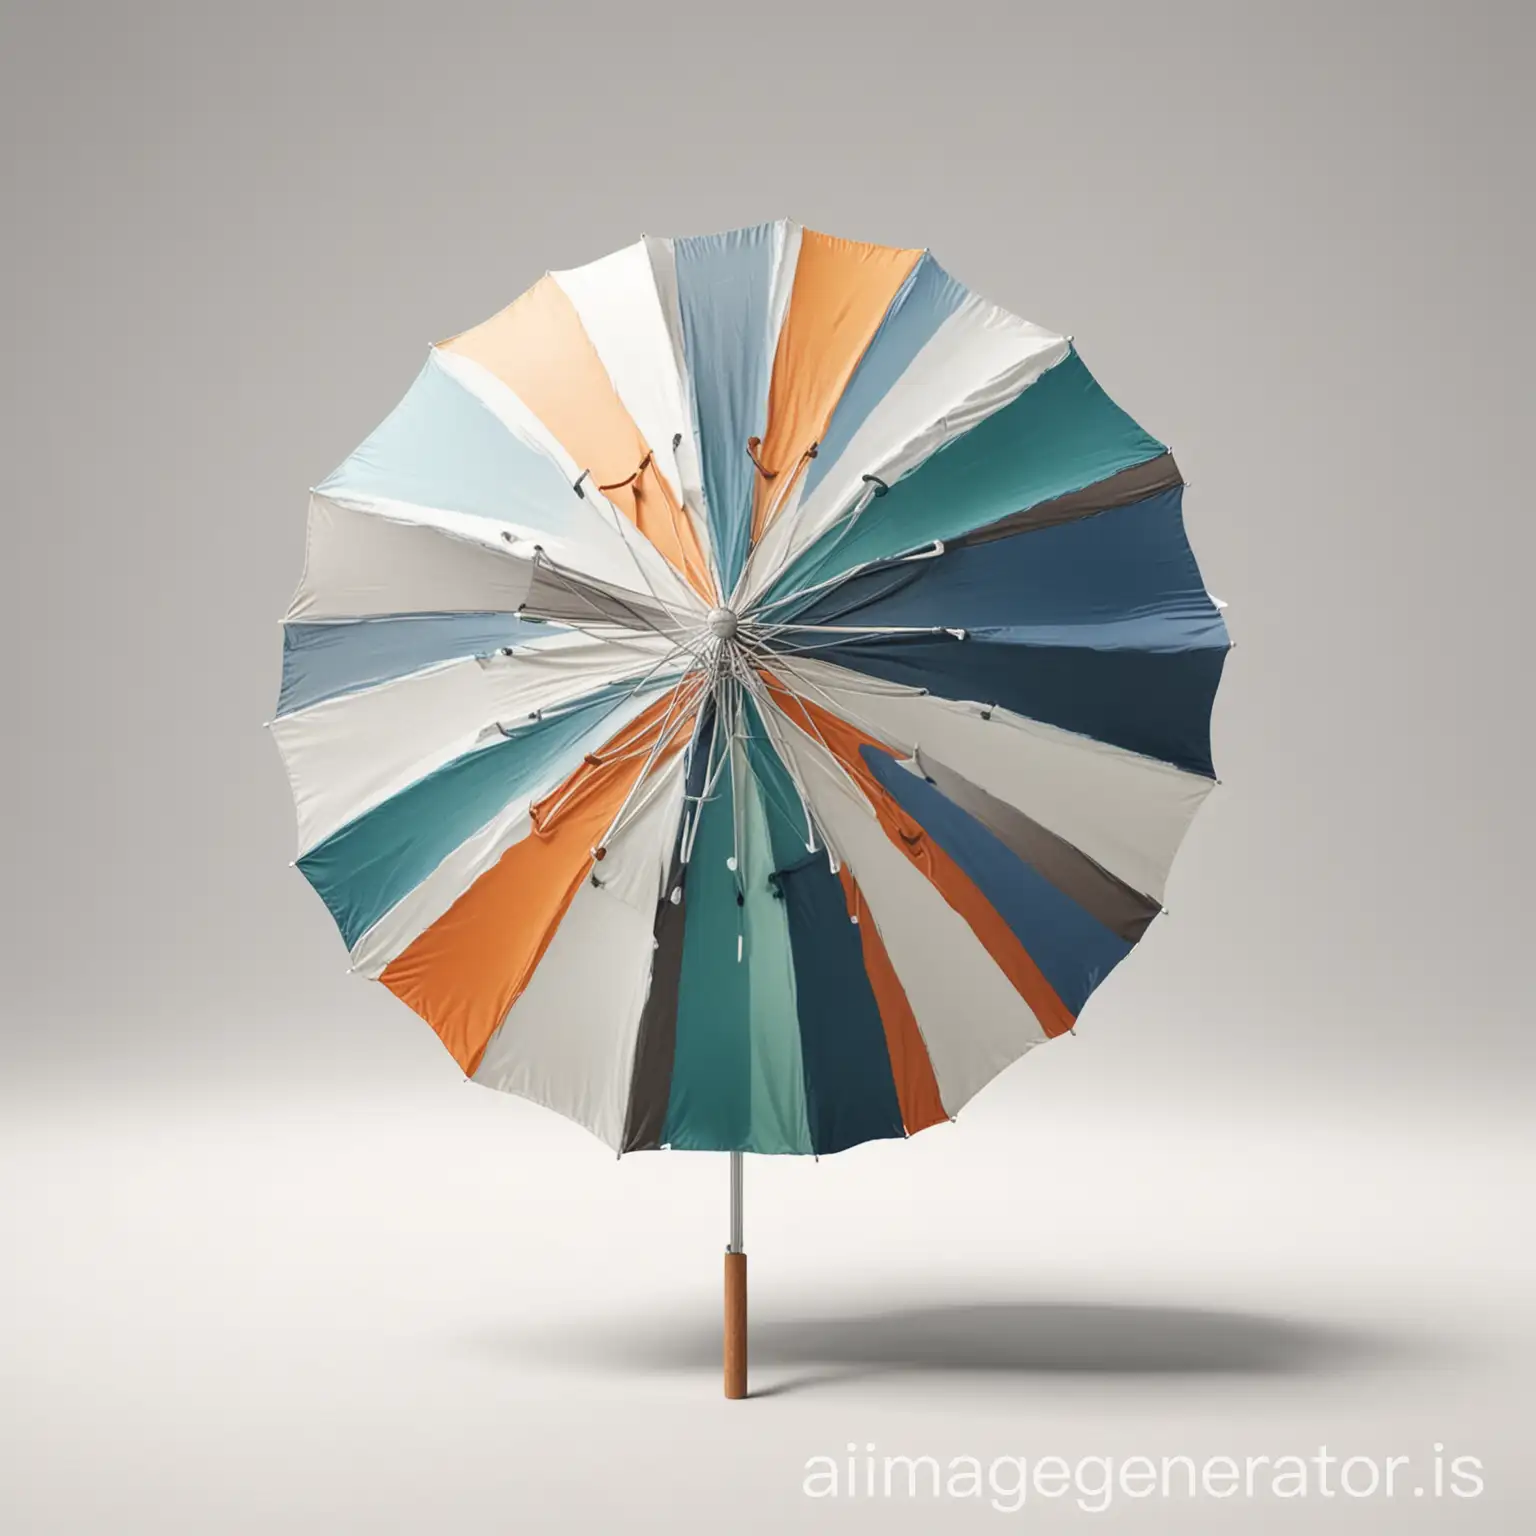 realistic image of a beach umbrella made of 2 colors, white background
